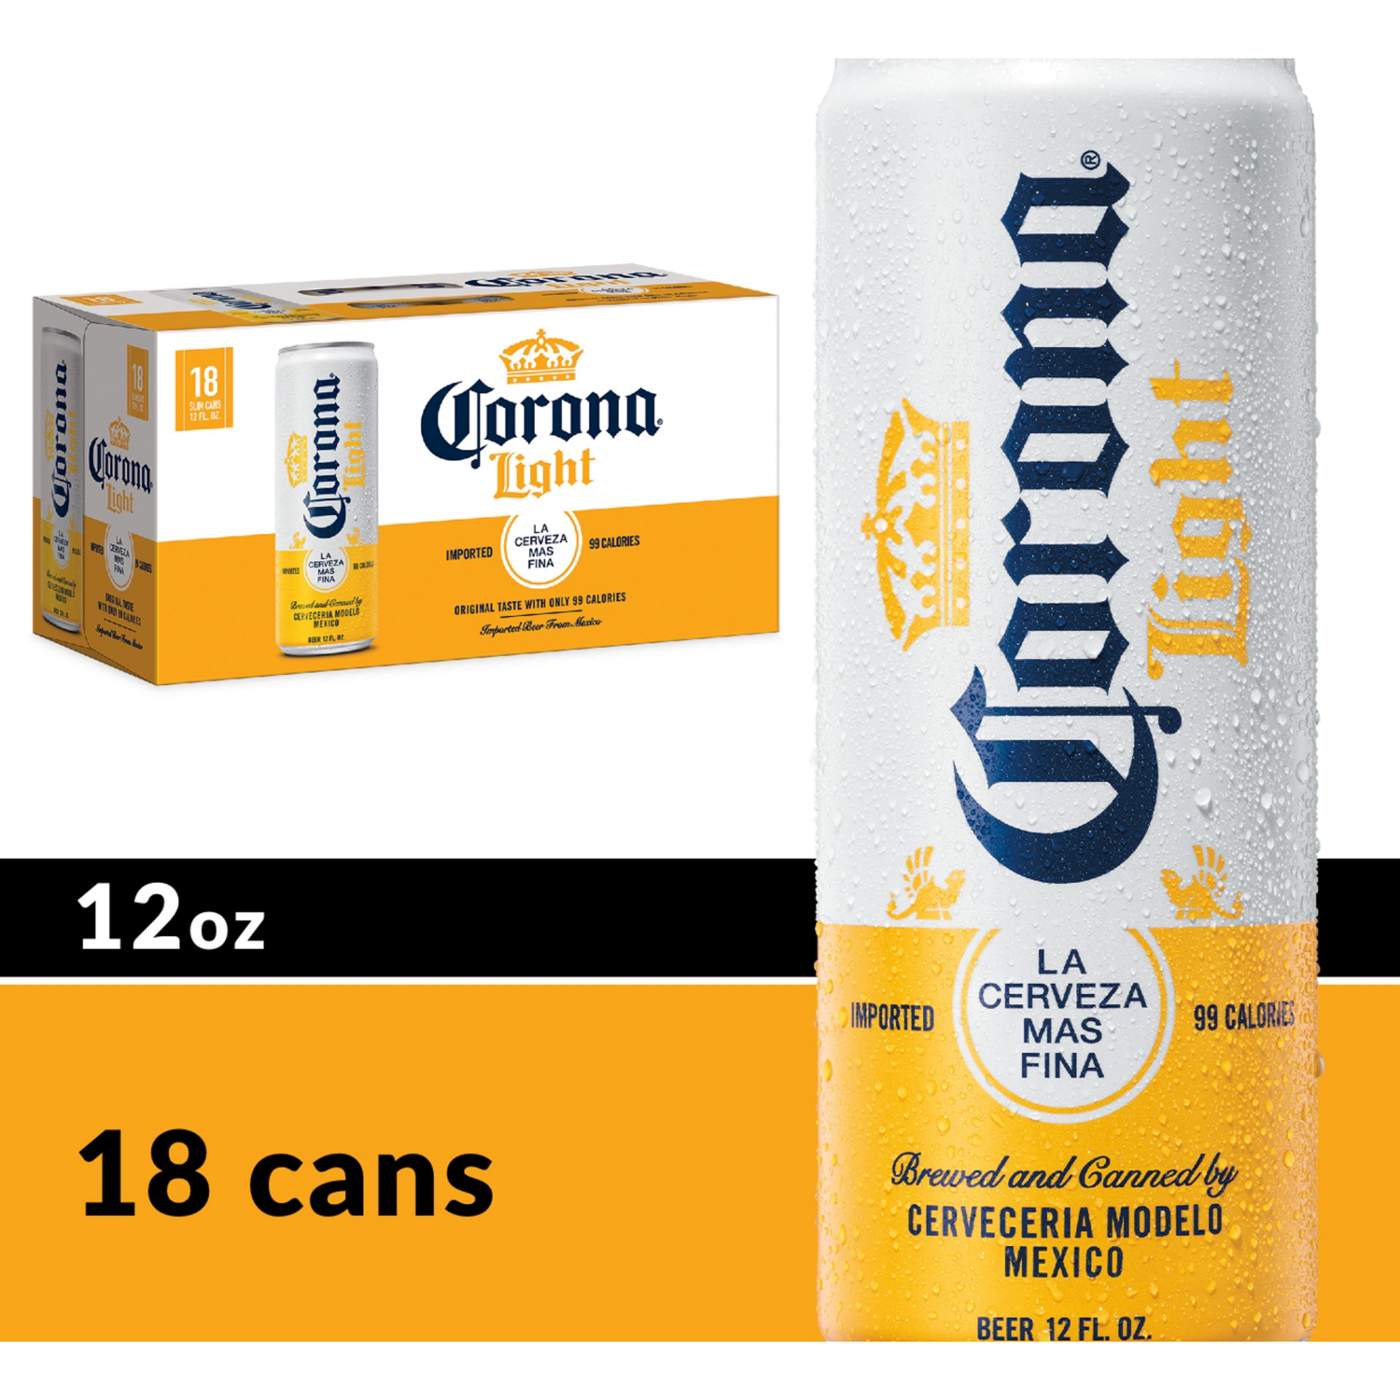 Corona Light Mexican Lager Import Light Beer 12 oz Cans, 18 pk; image 9 of 9